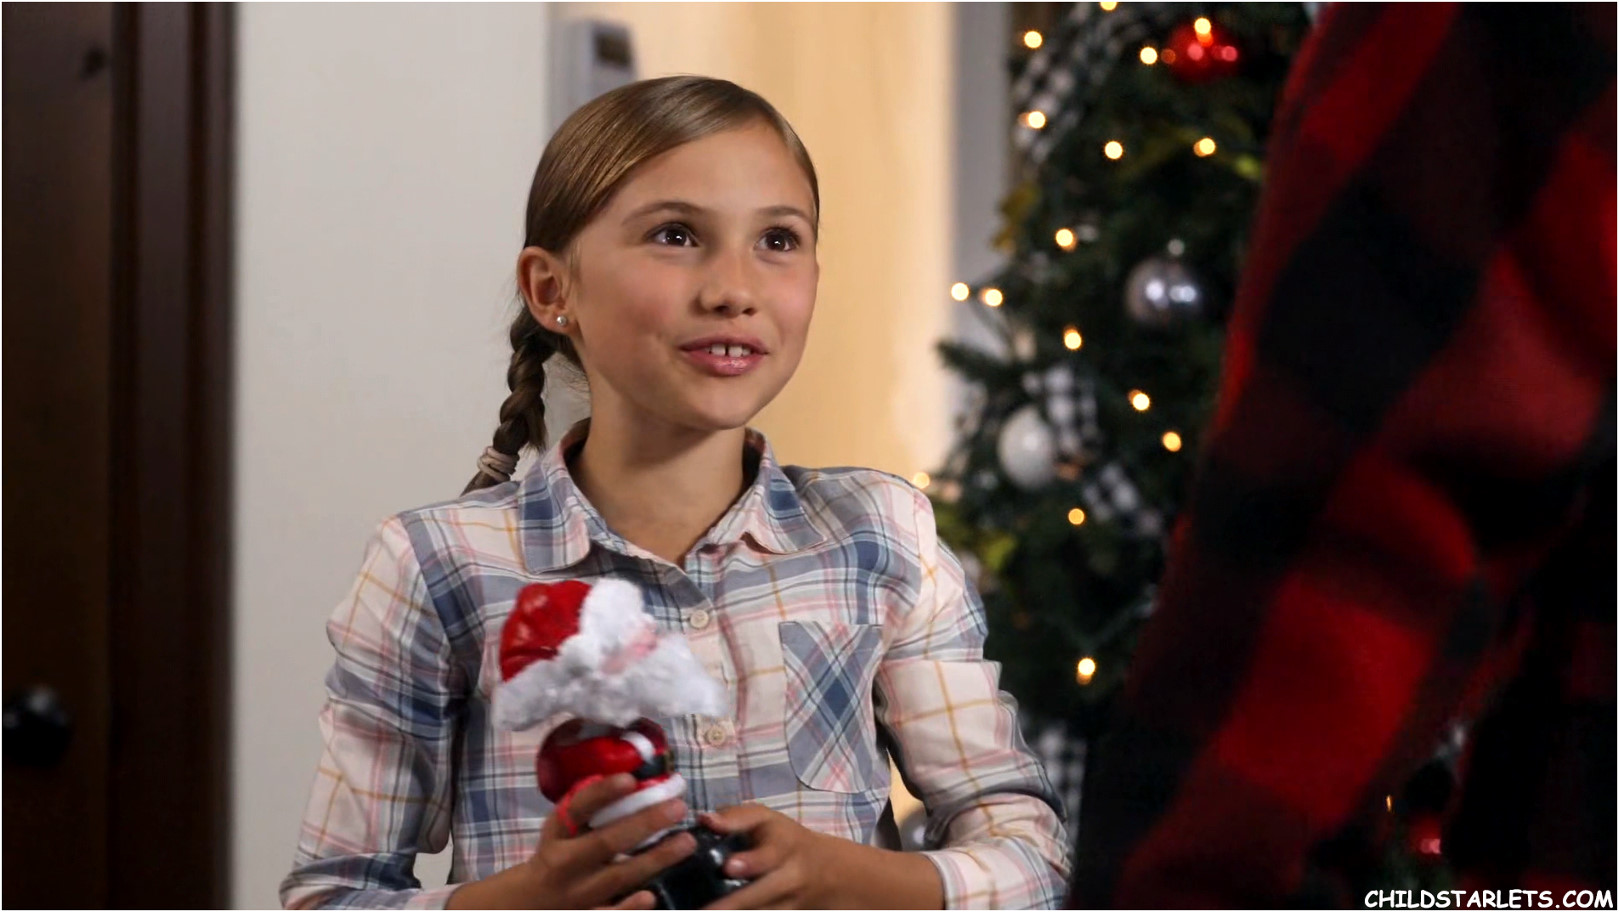 Rubi Tupper
"A Christmas Miracle For Daisy" - 2021/HD